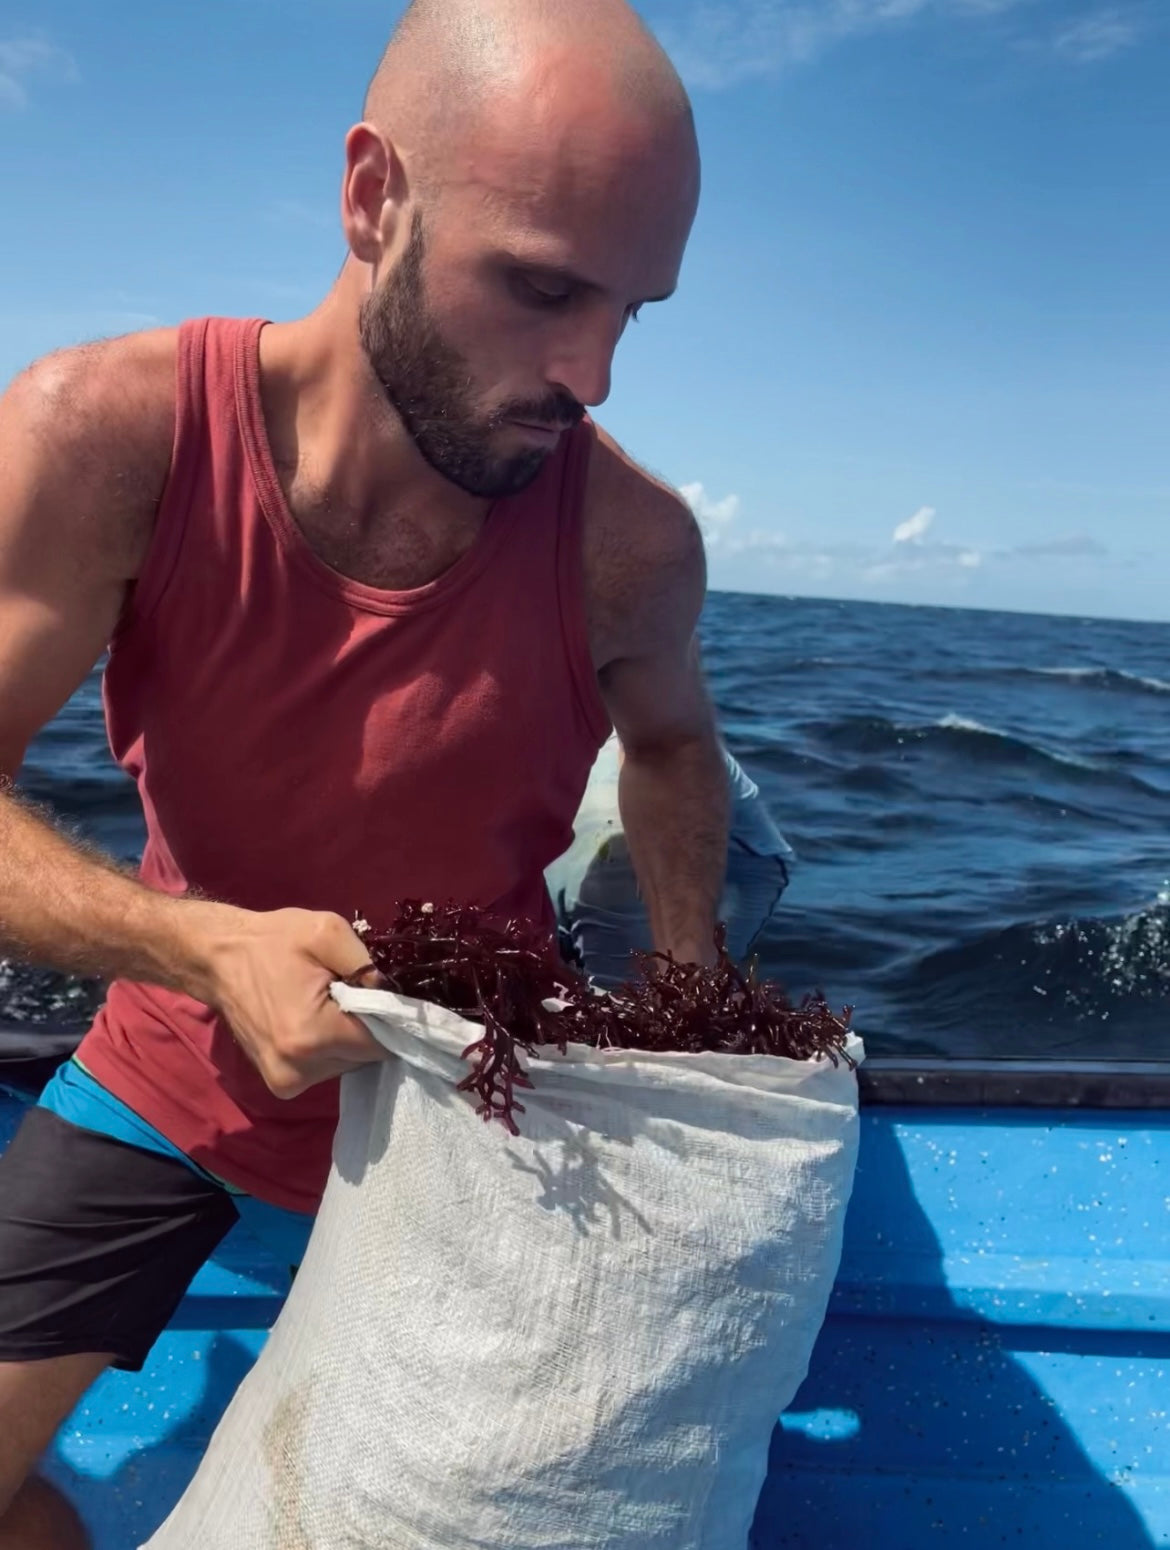 Samadhi Sea Moss Founder collecting sea moss from the ocean